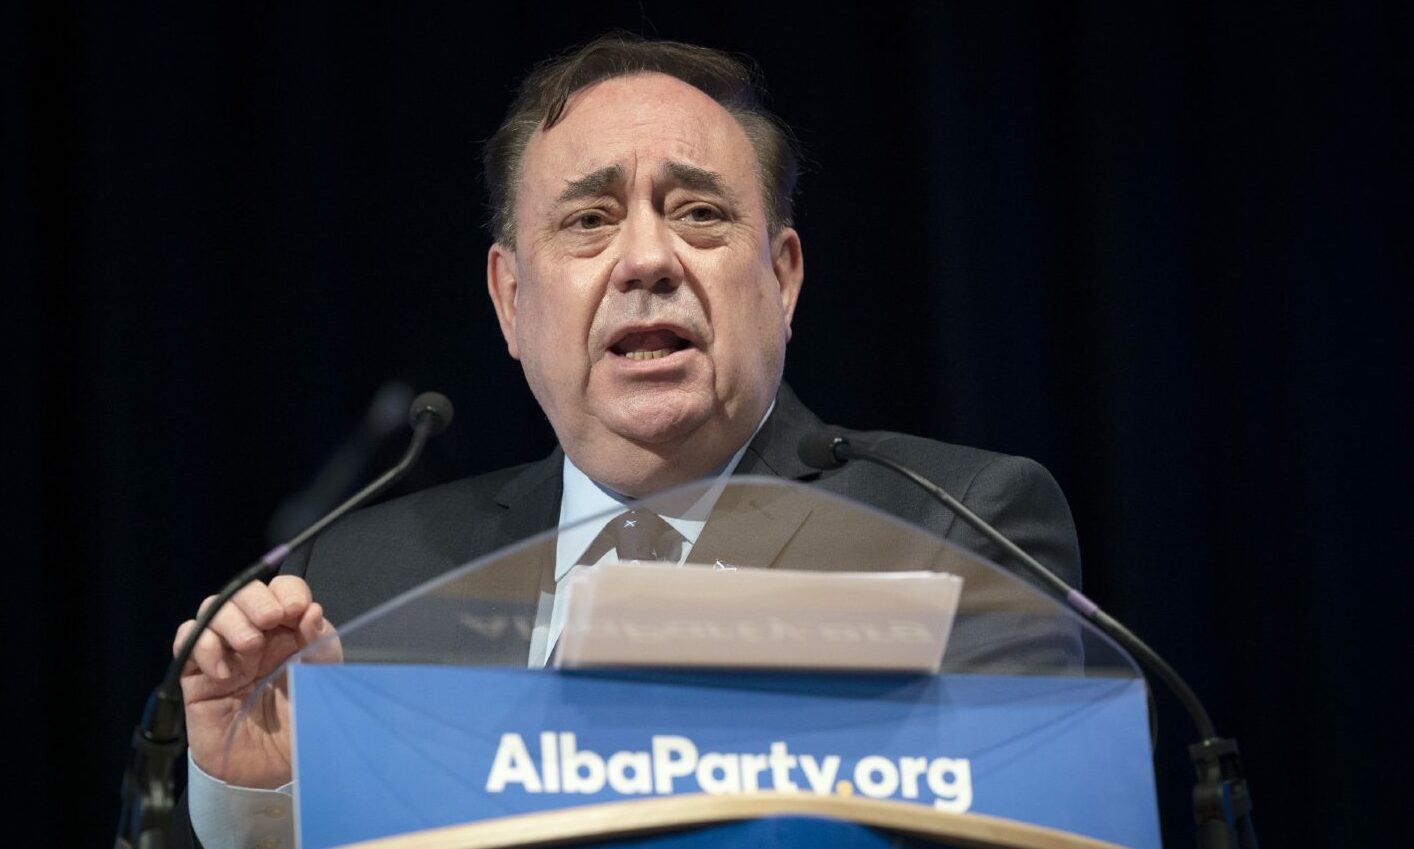 Alex Salmond for the Alba Party